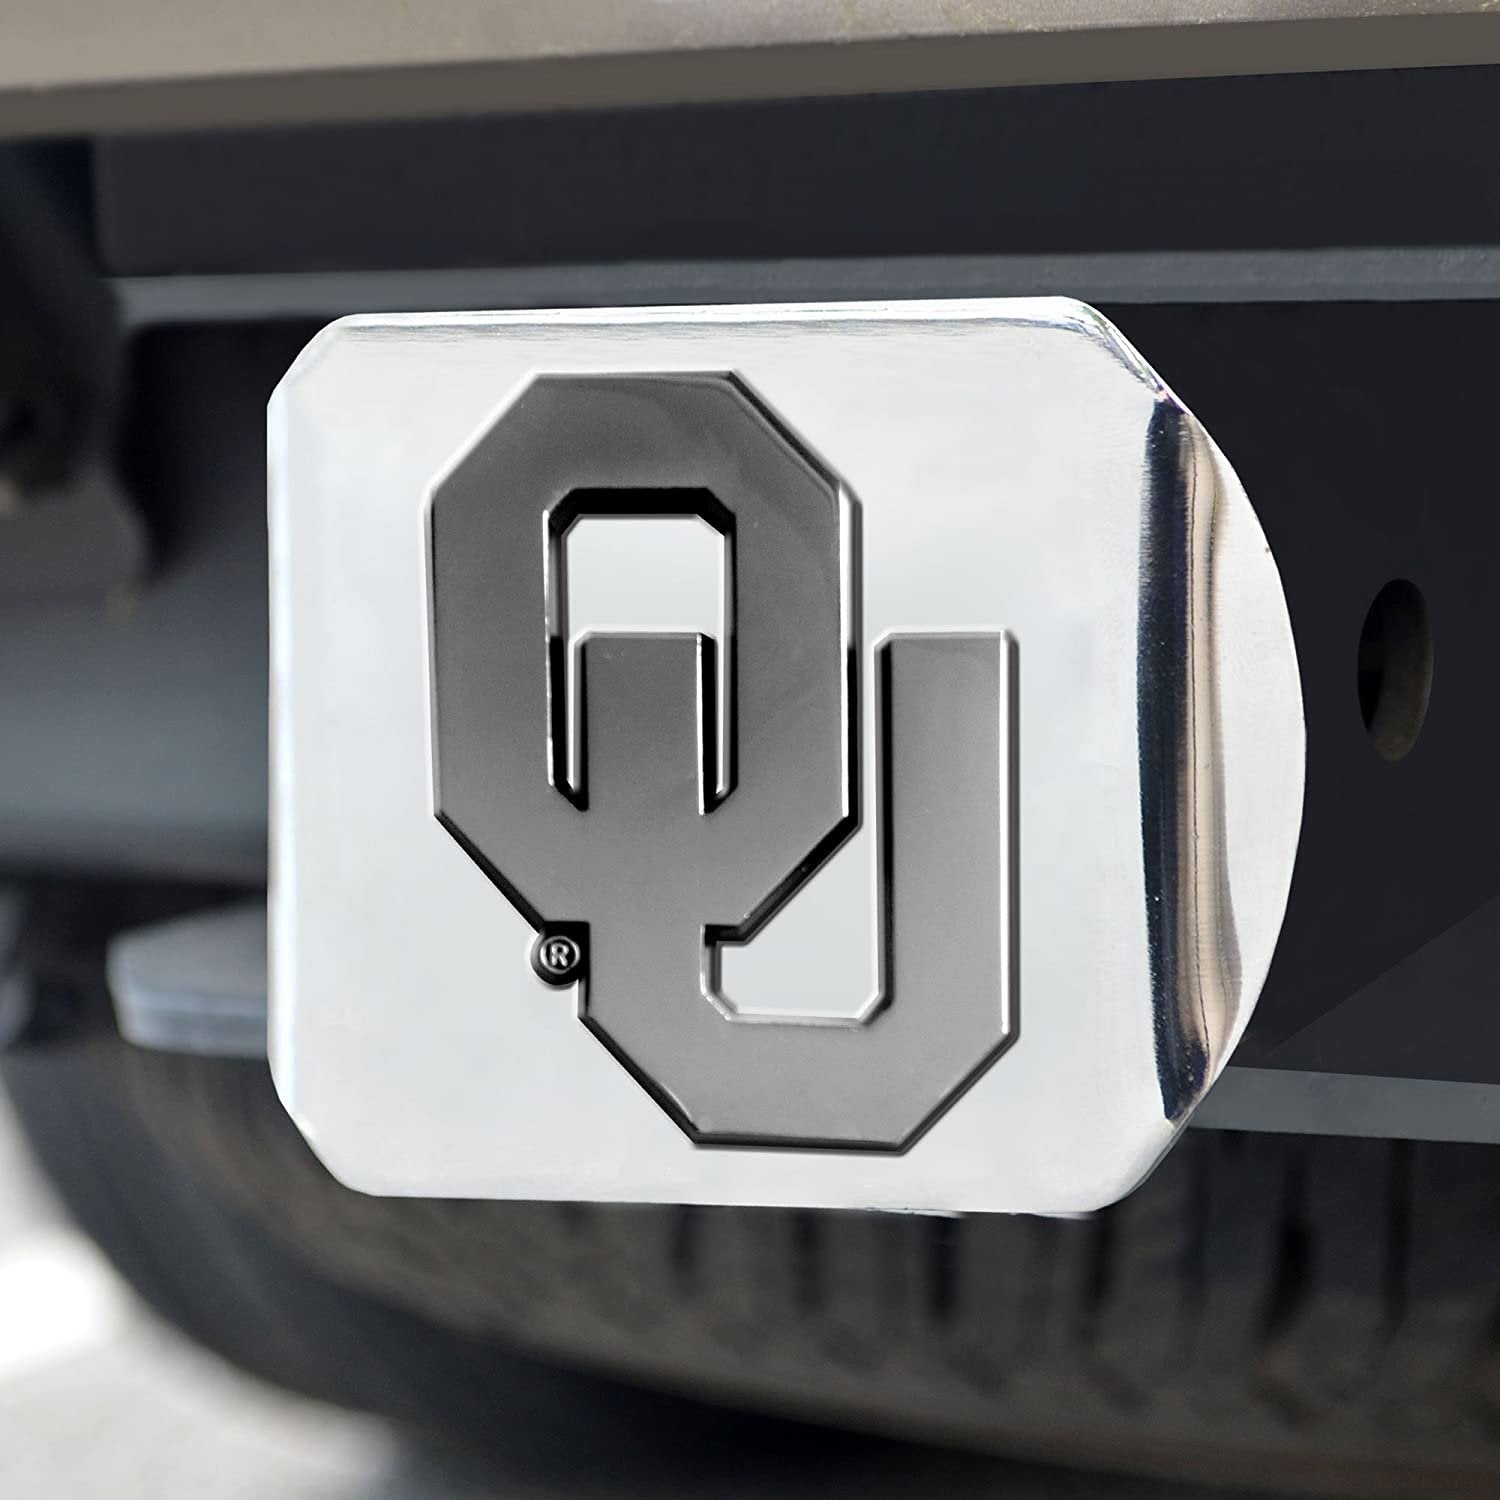 Oklahoma Sooners Hitch Cover Solid Metal with Raised Chrome Metal Emblem 2" Square Type III University of